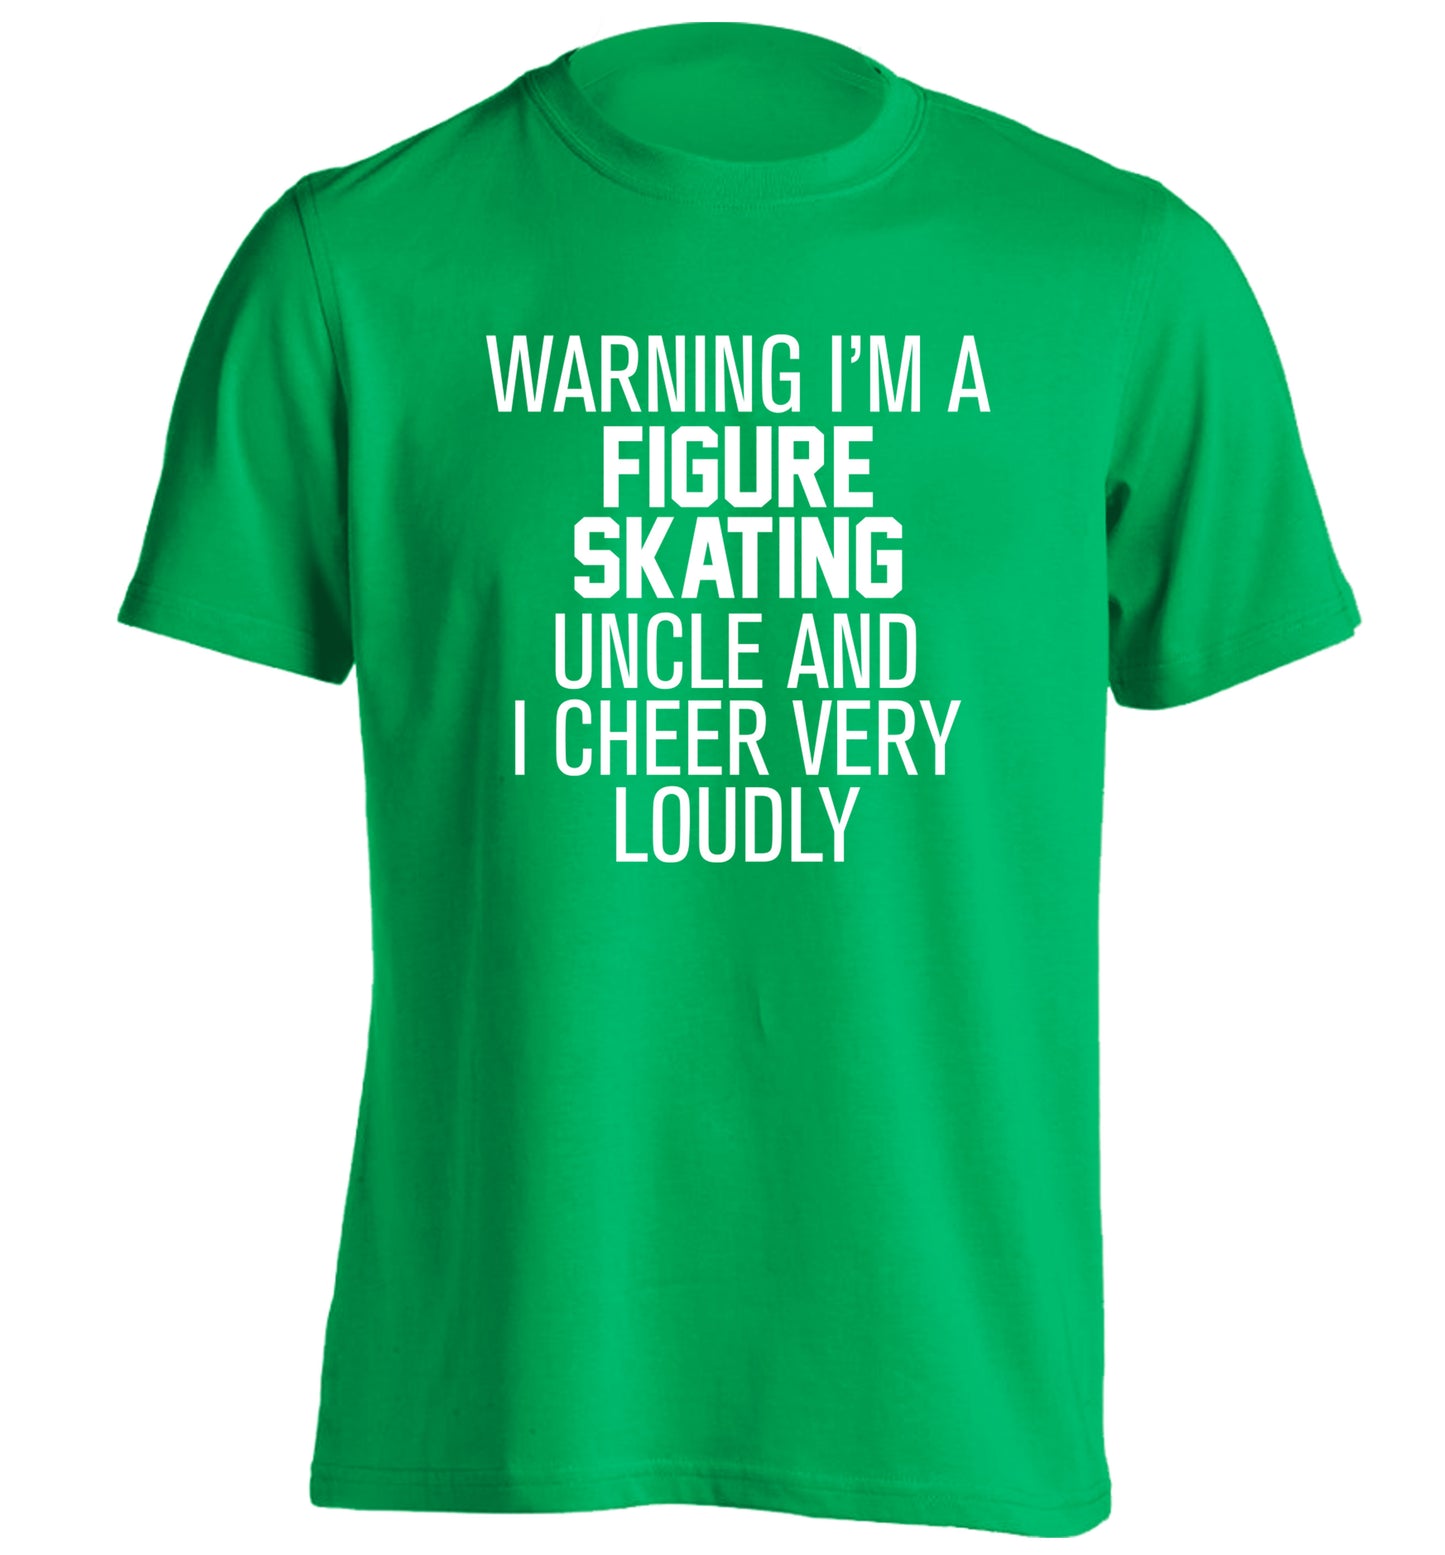 Warning I'm a figure skating uncle and I cheer very loudly adults unisexgreen Tshirt 2XL